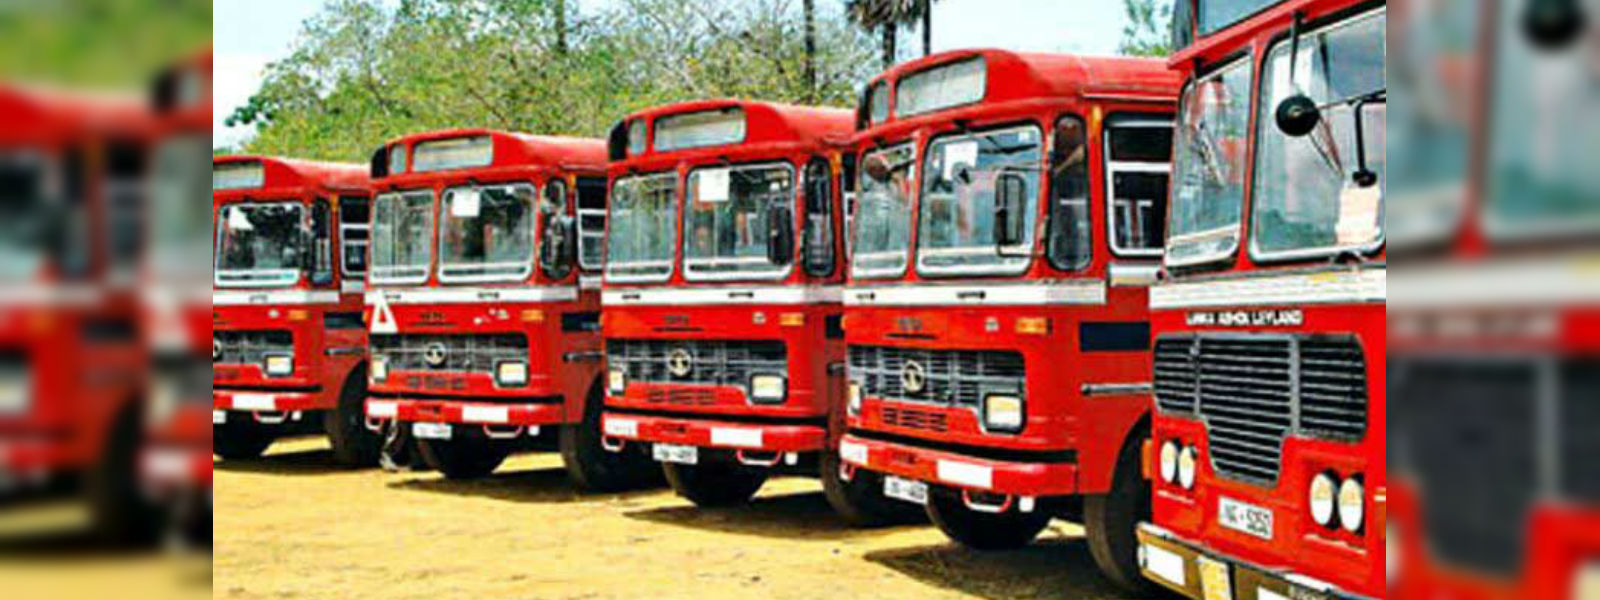 SLTB steps up bus services due to train strike